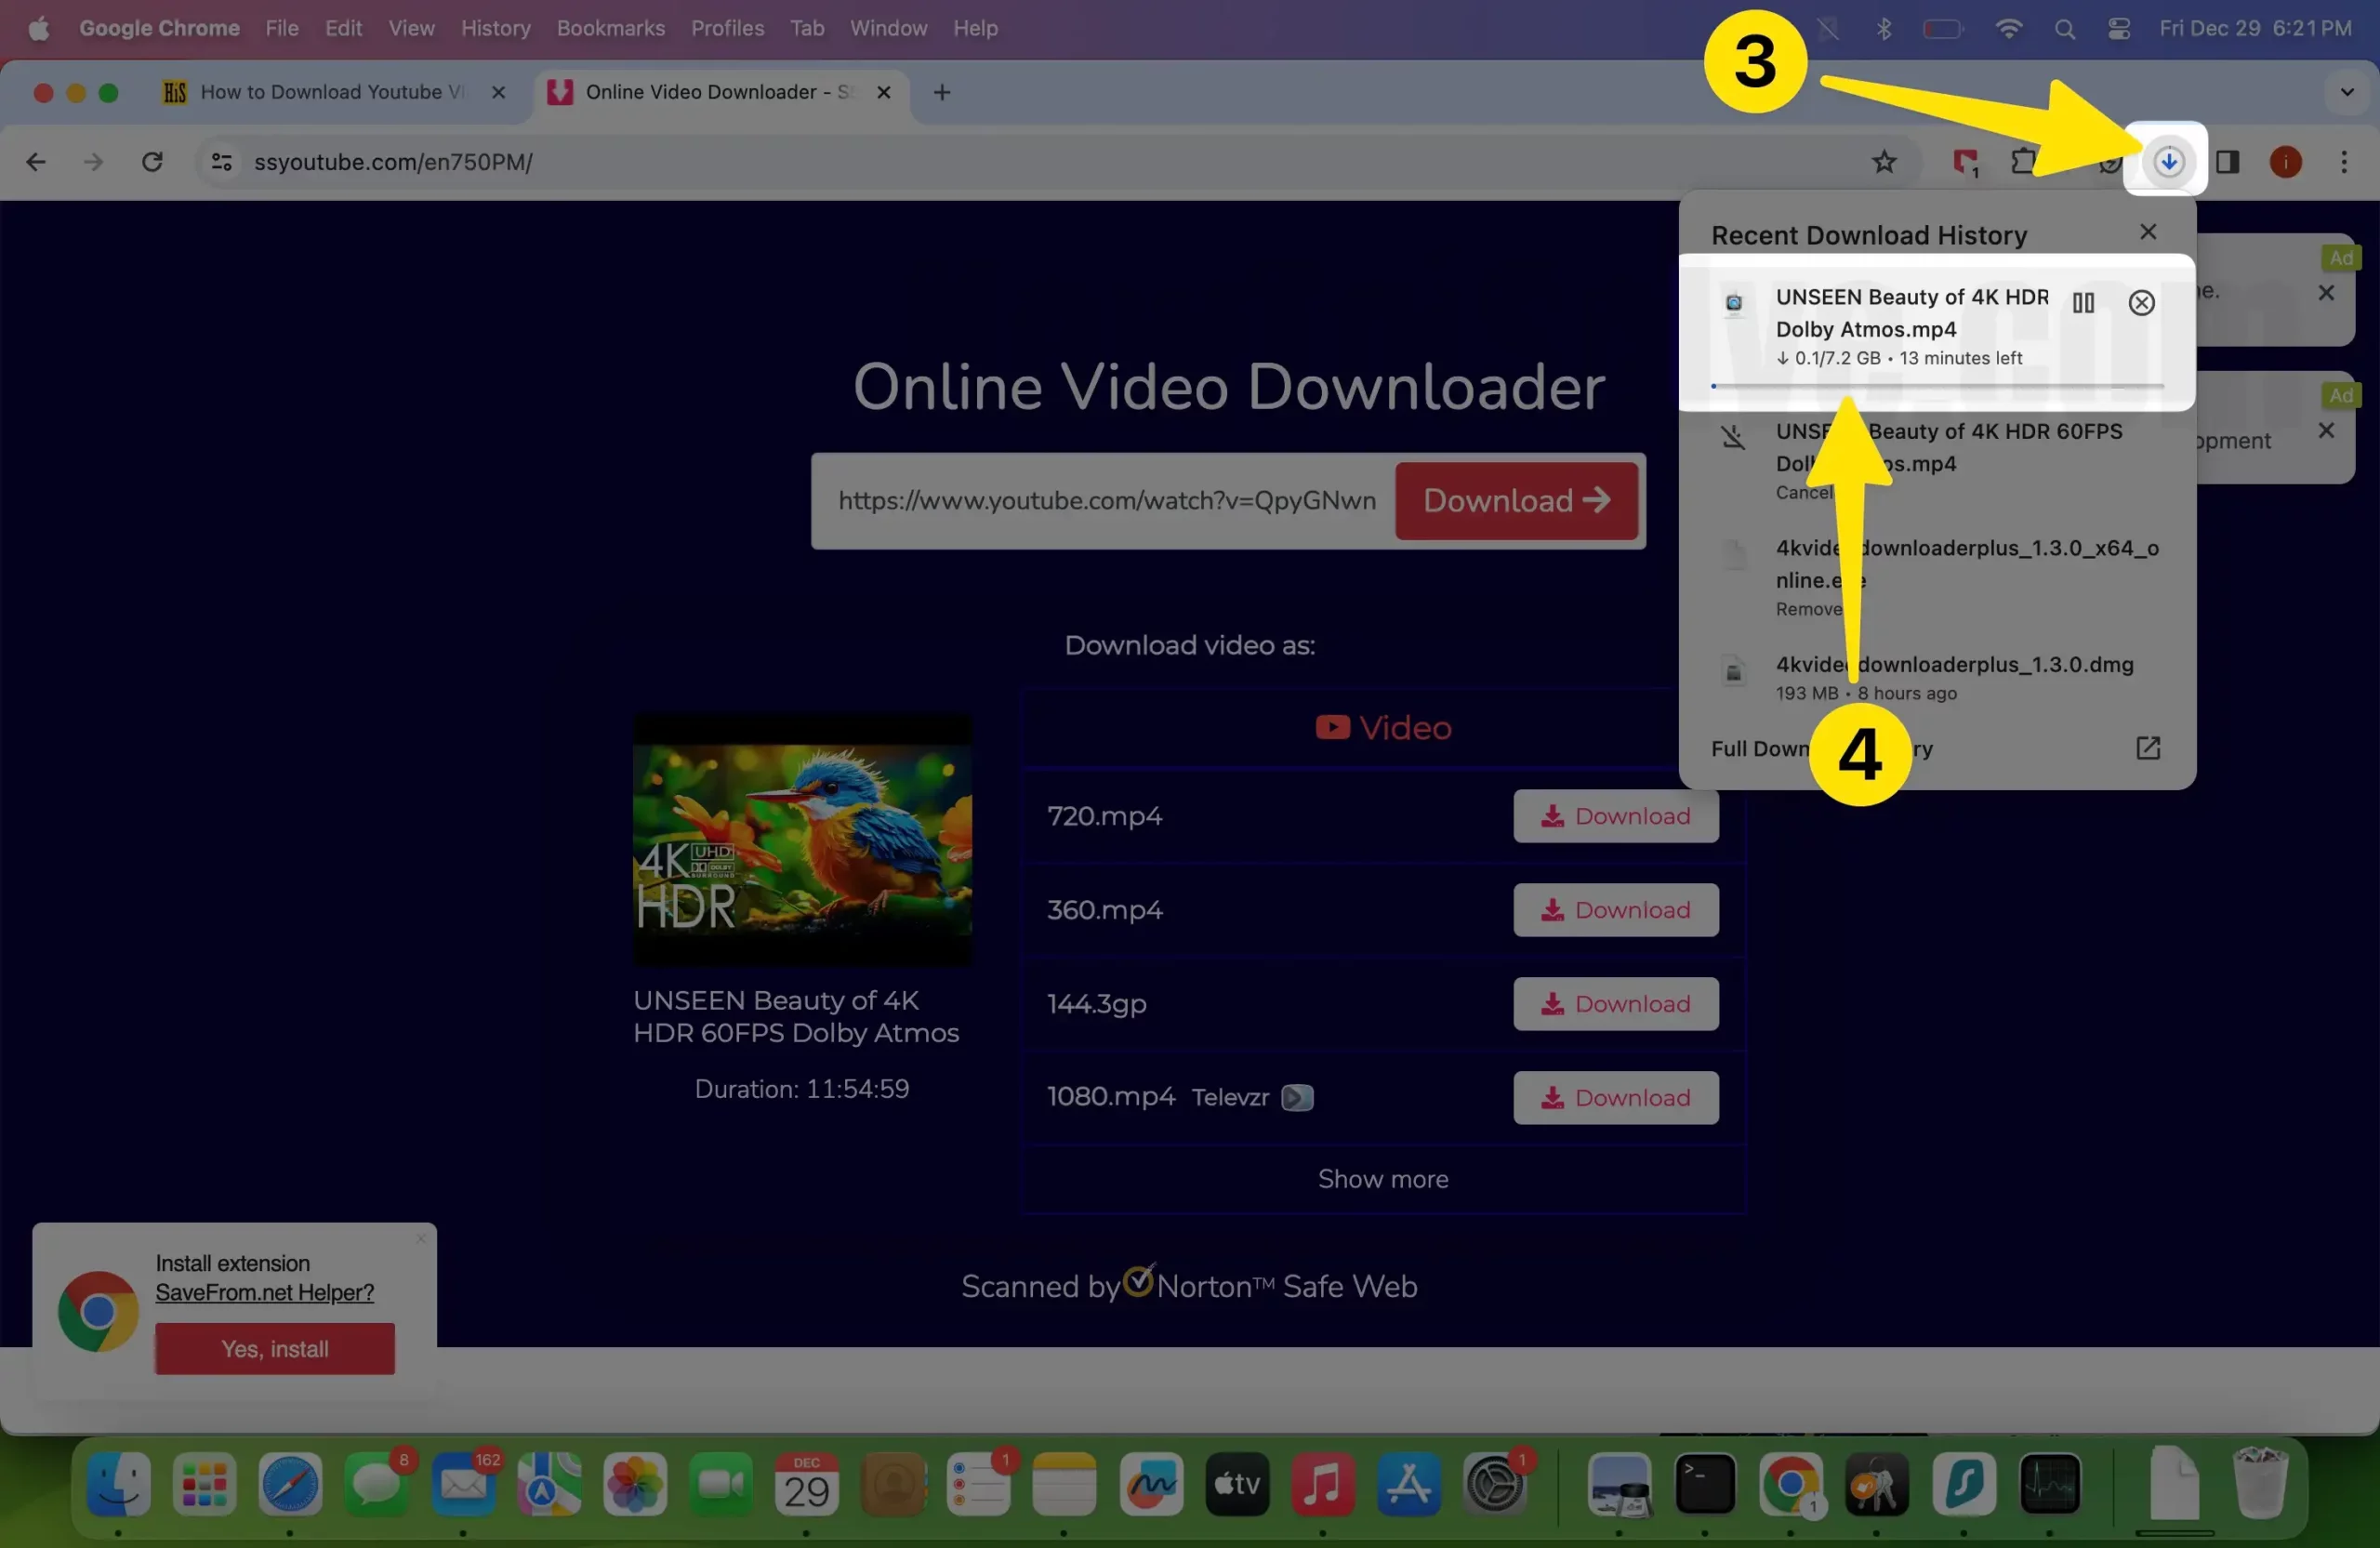 Select the download video to process on mac